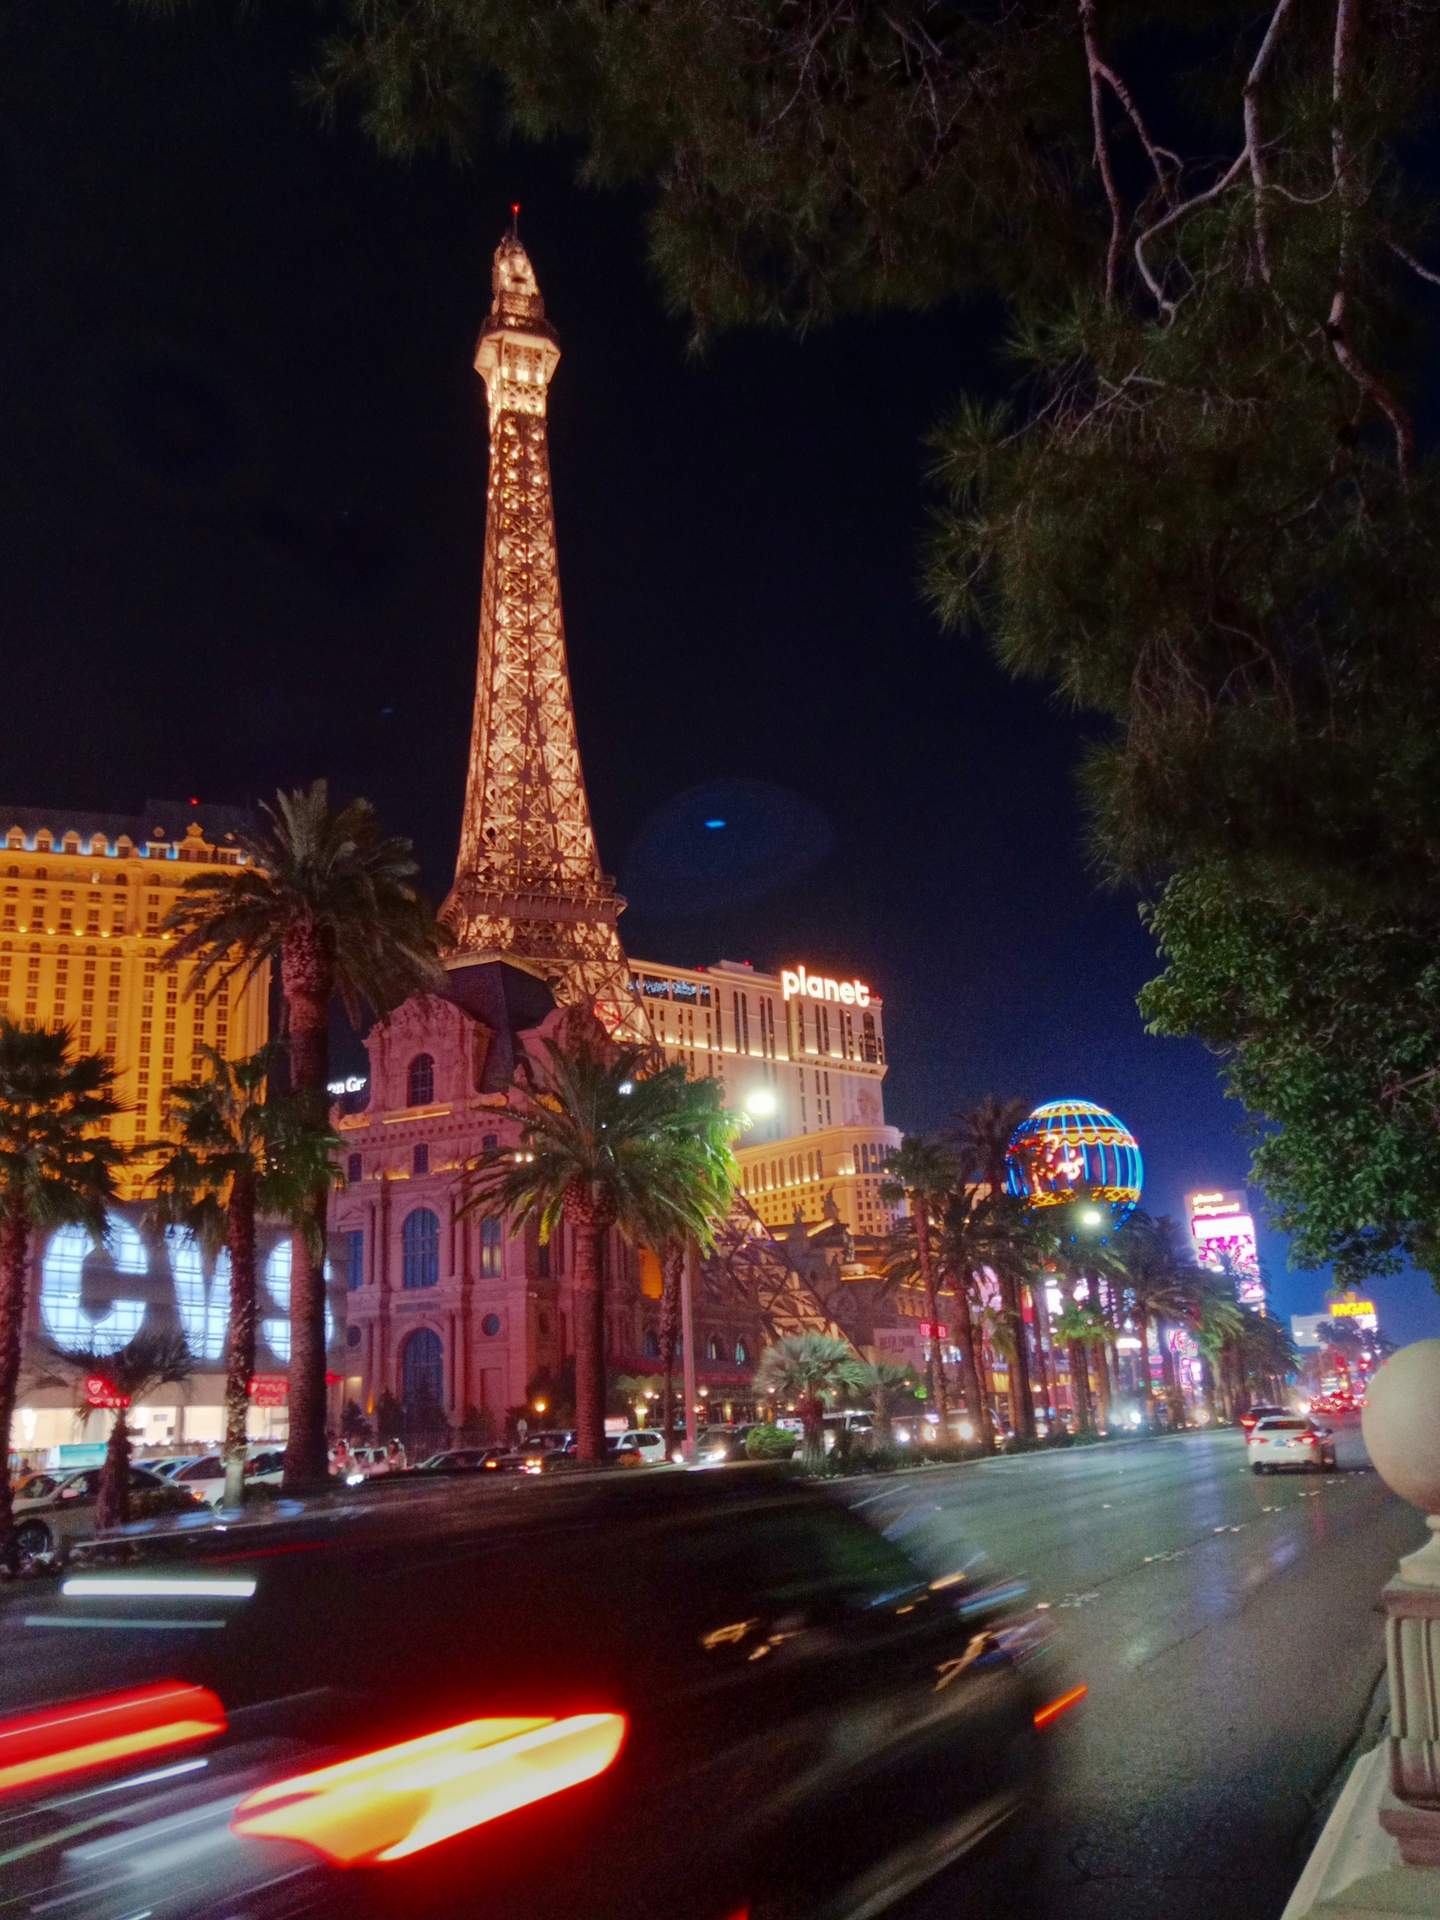 A car wizzing by the faux Eiffel Tower on the Las Vegas strip.